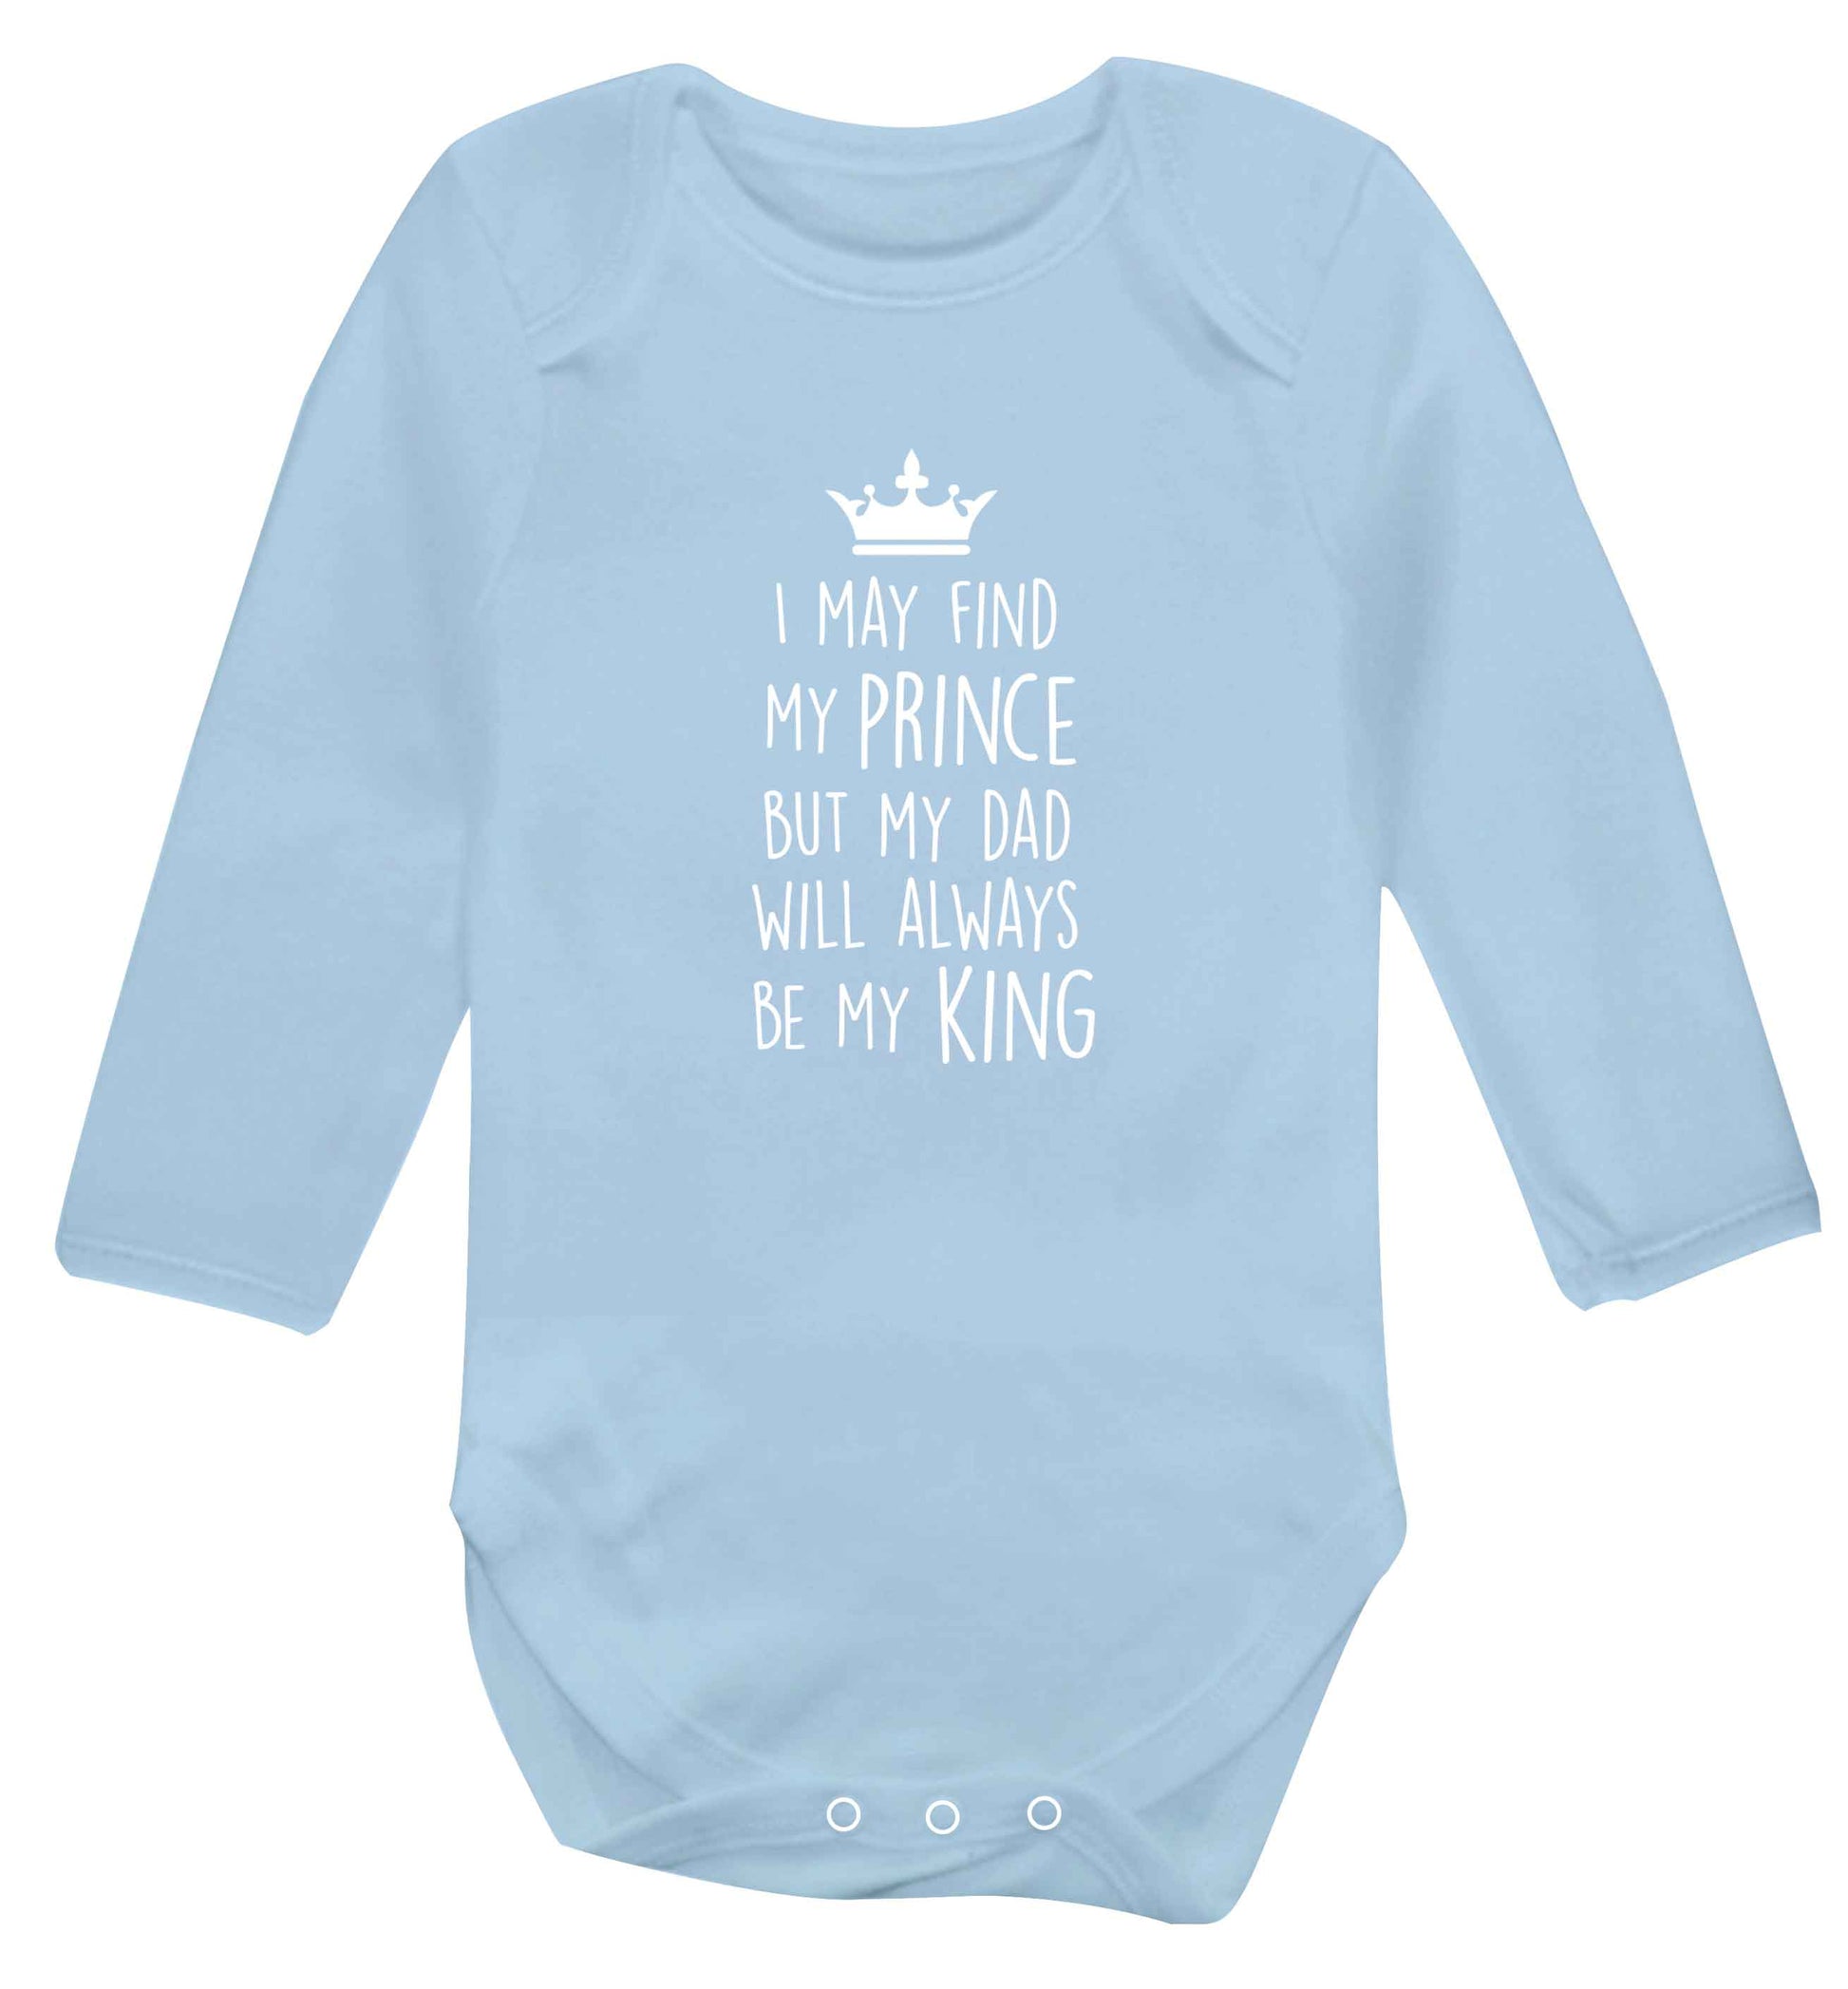 I may find my prince but my dad will always be my king baby vest long sleeved pale blue 6-12 months